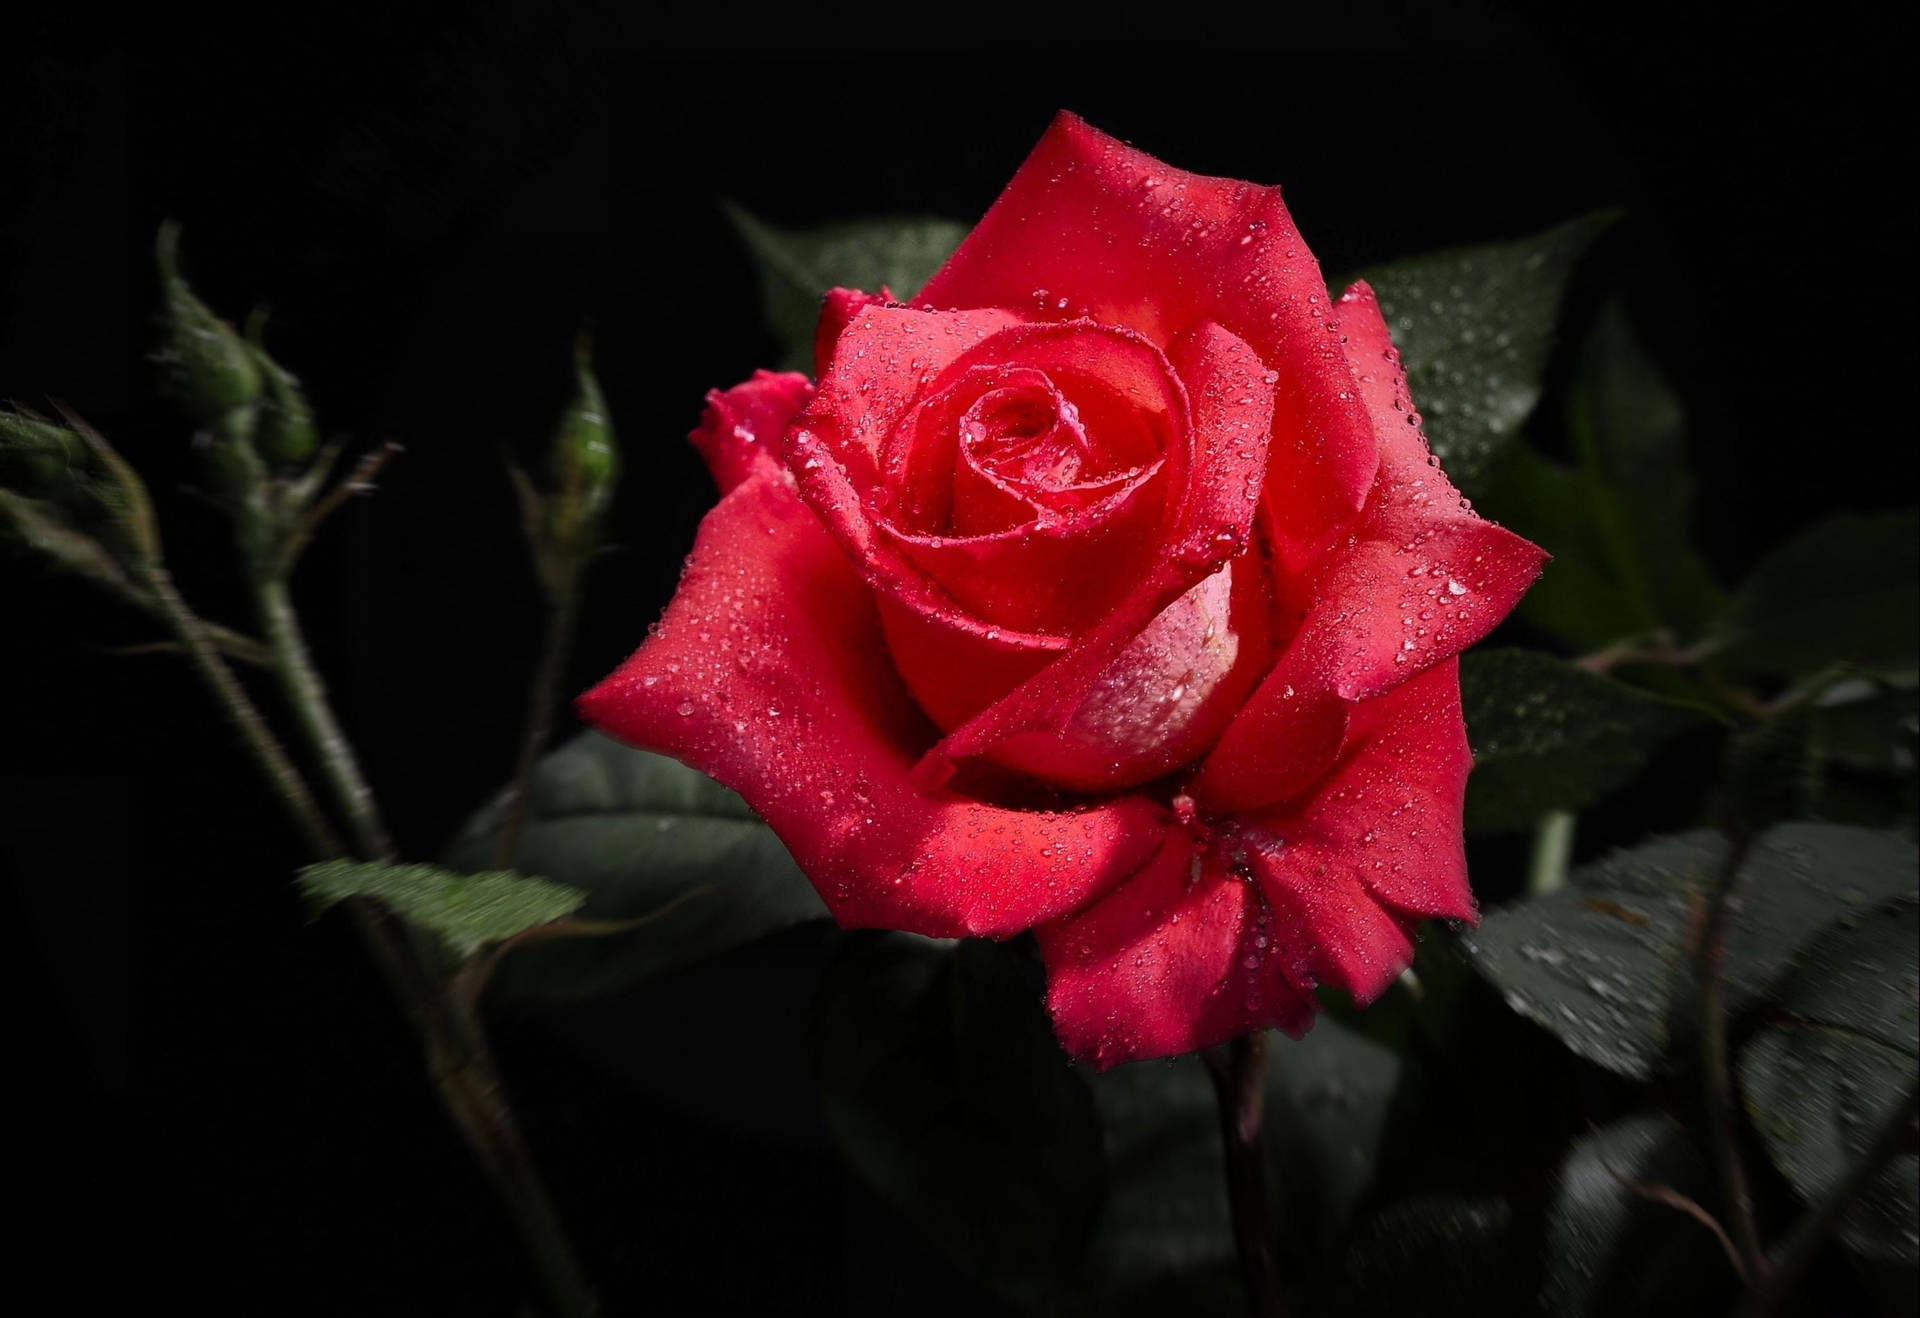 Background Black With A Red Rose Wallpaper